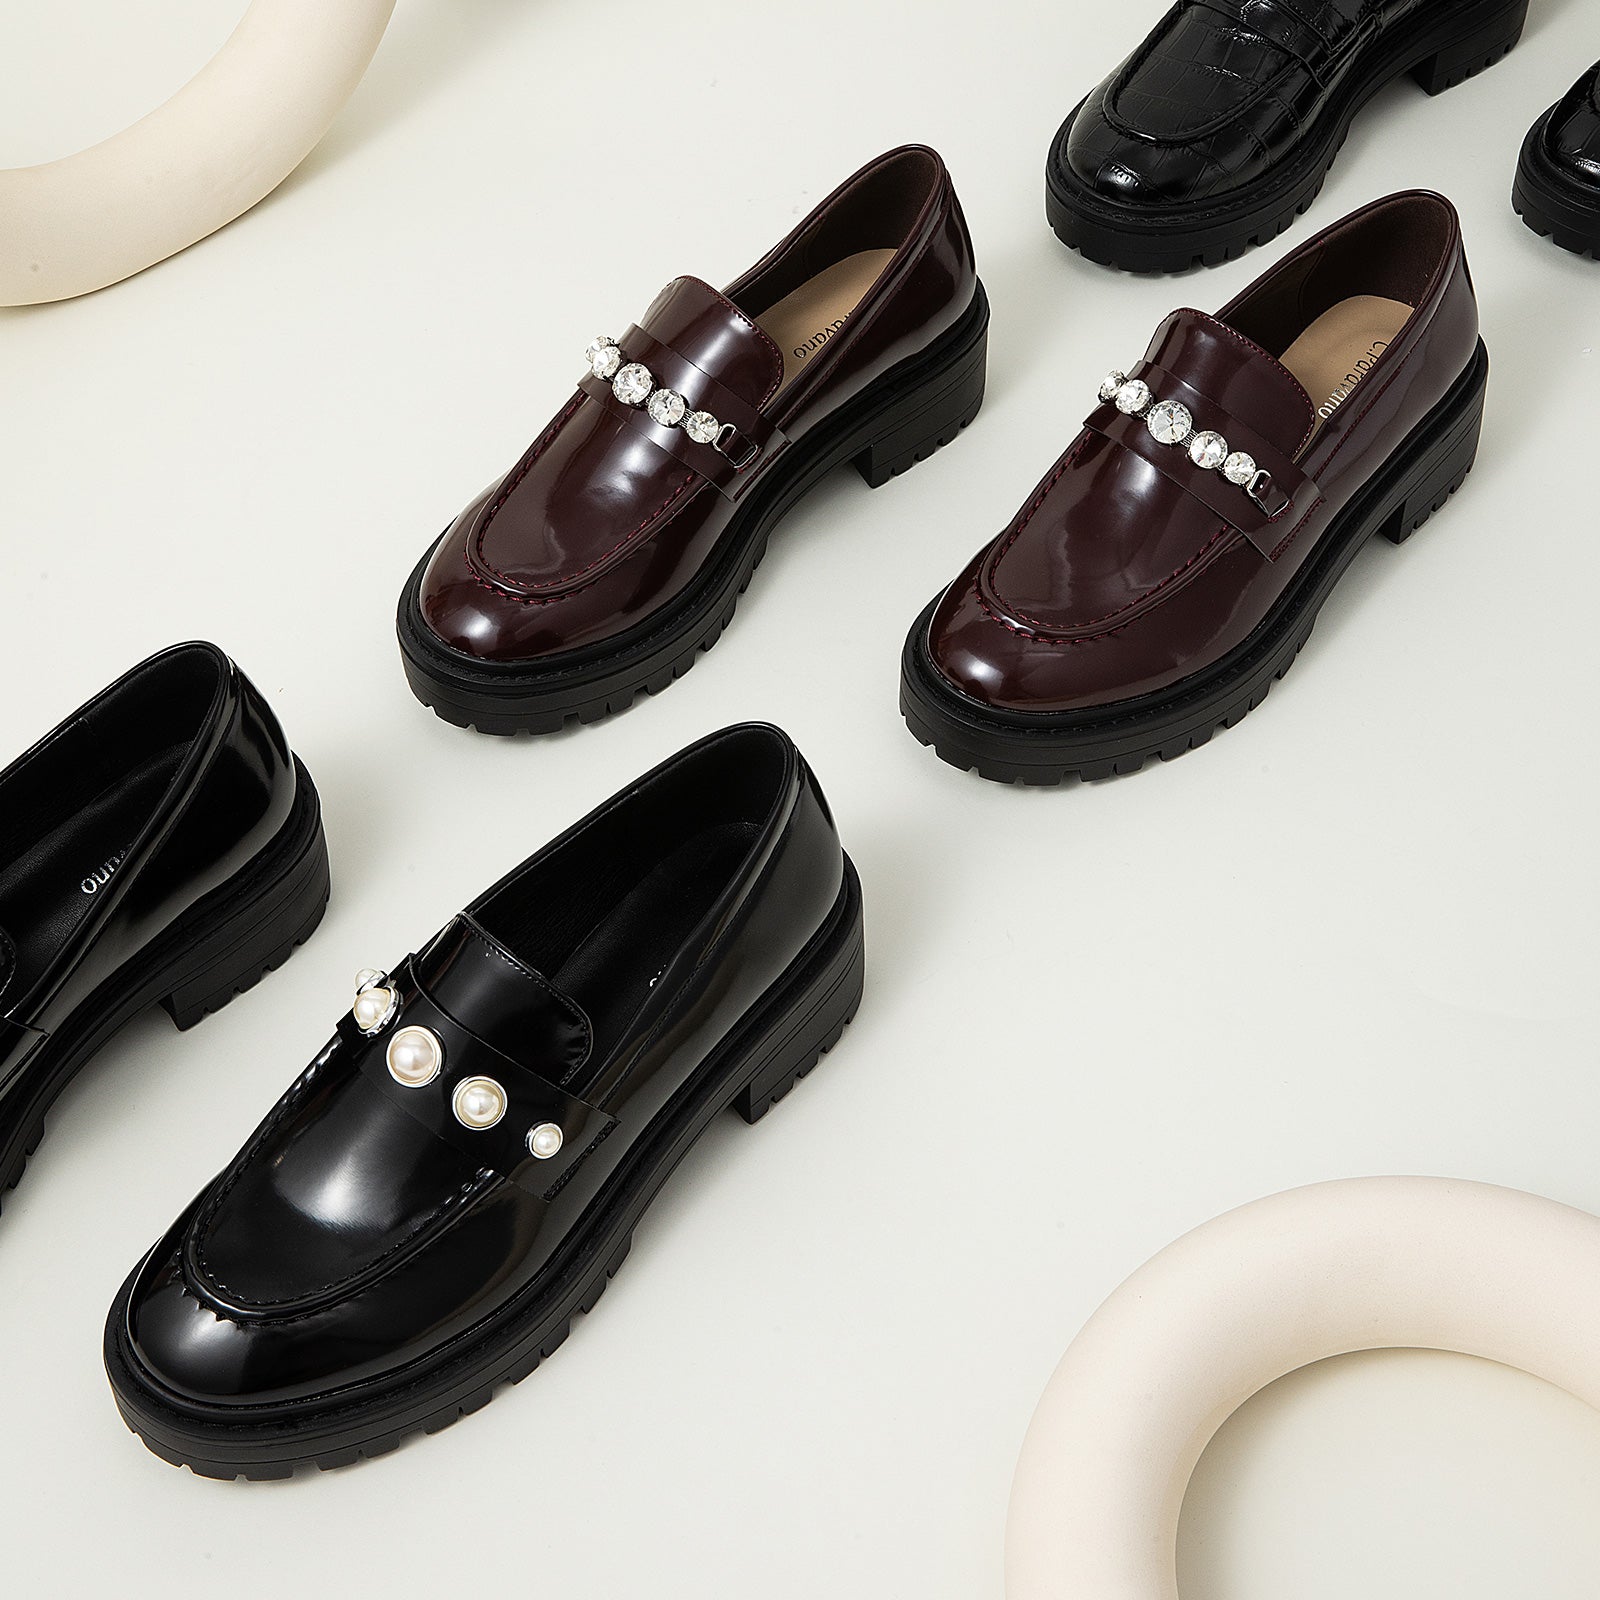 Edgy Minimalism: Platform Loafers in Black with distinctive pearl details, a chic and minimalist addition to your footwear collection.